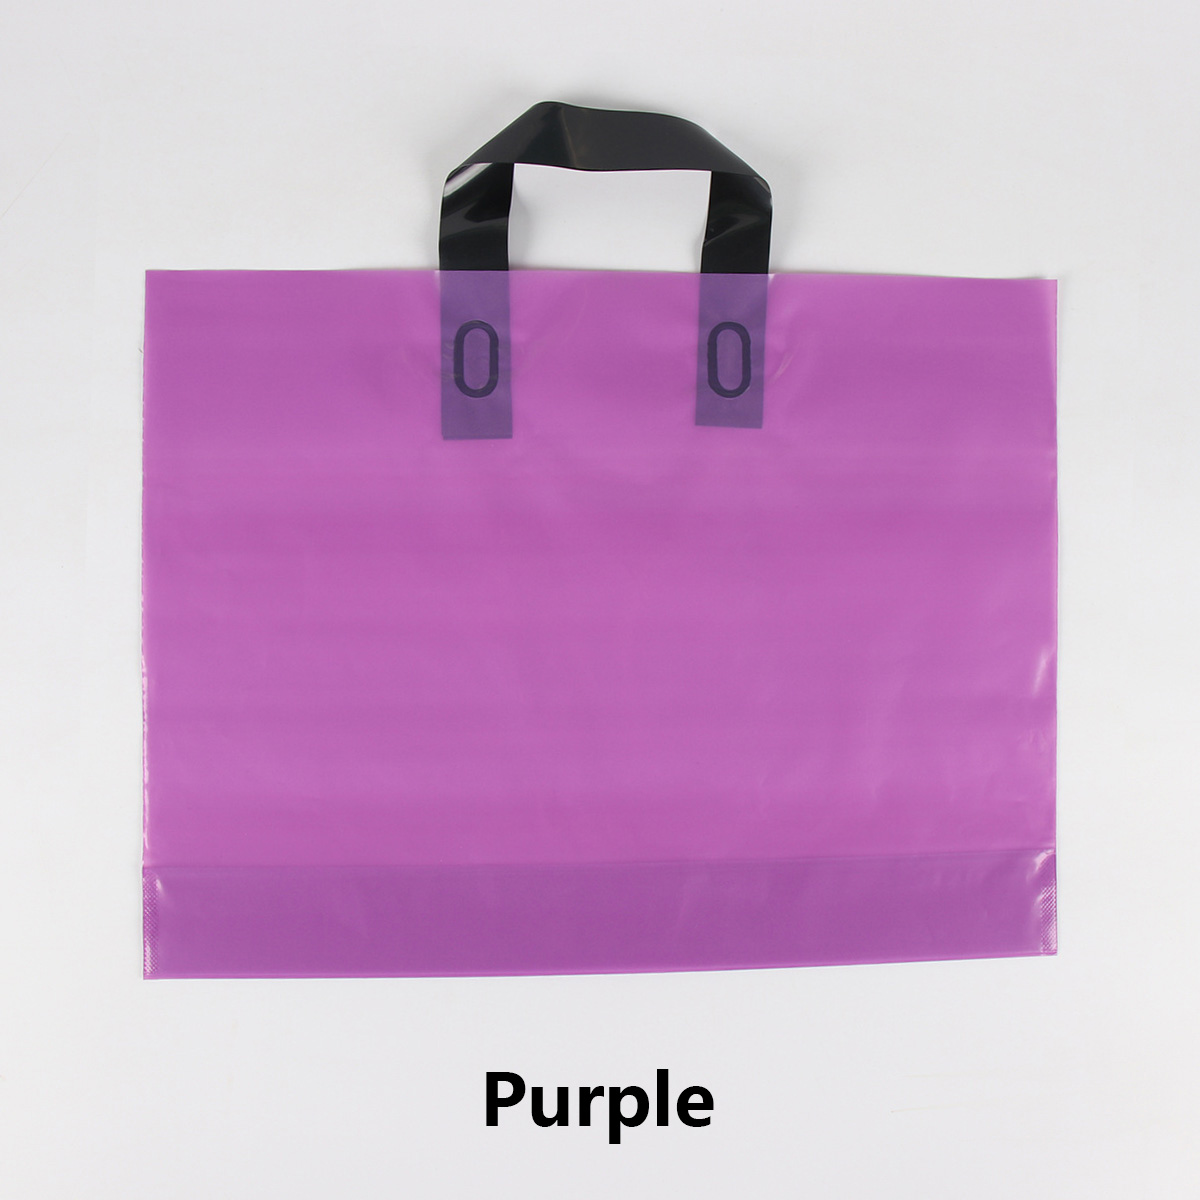 Stock colors for soft loop handle bags